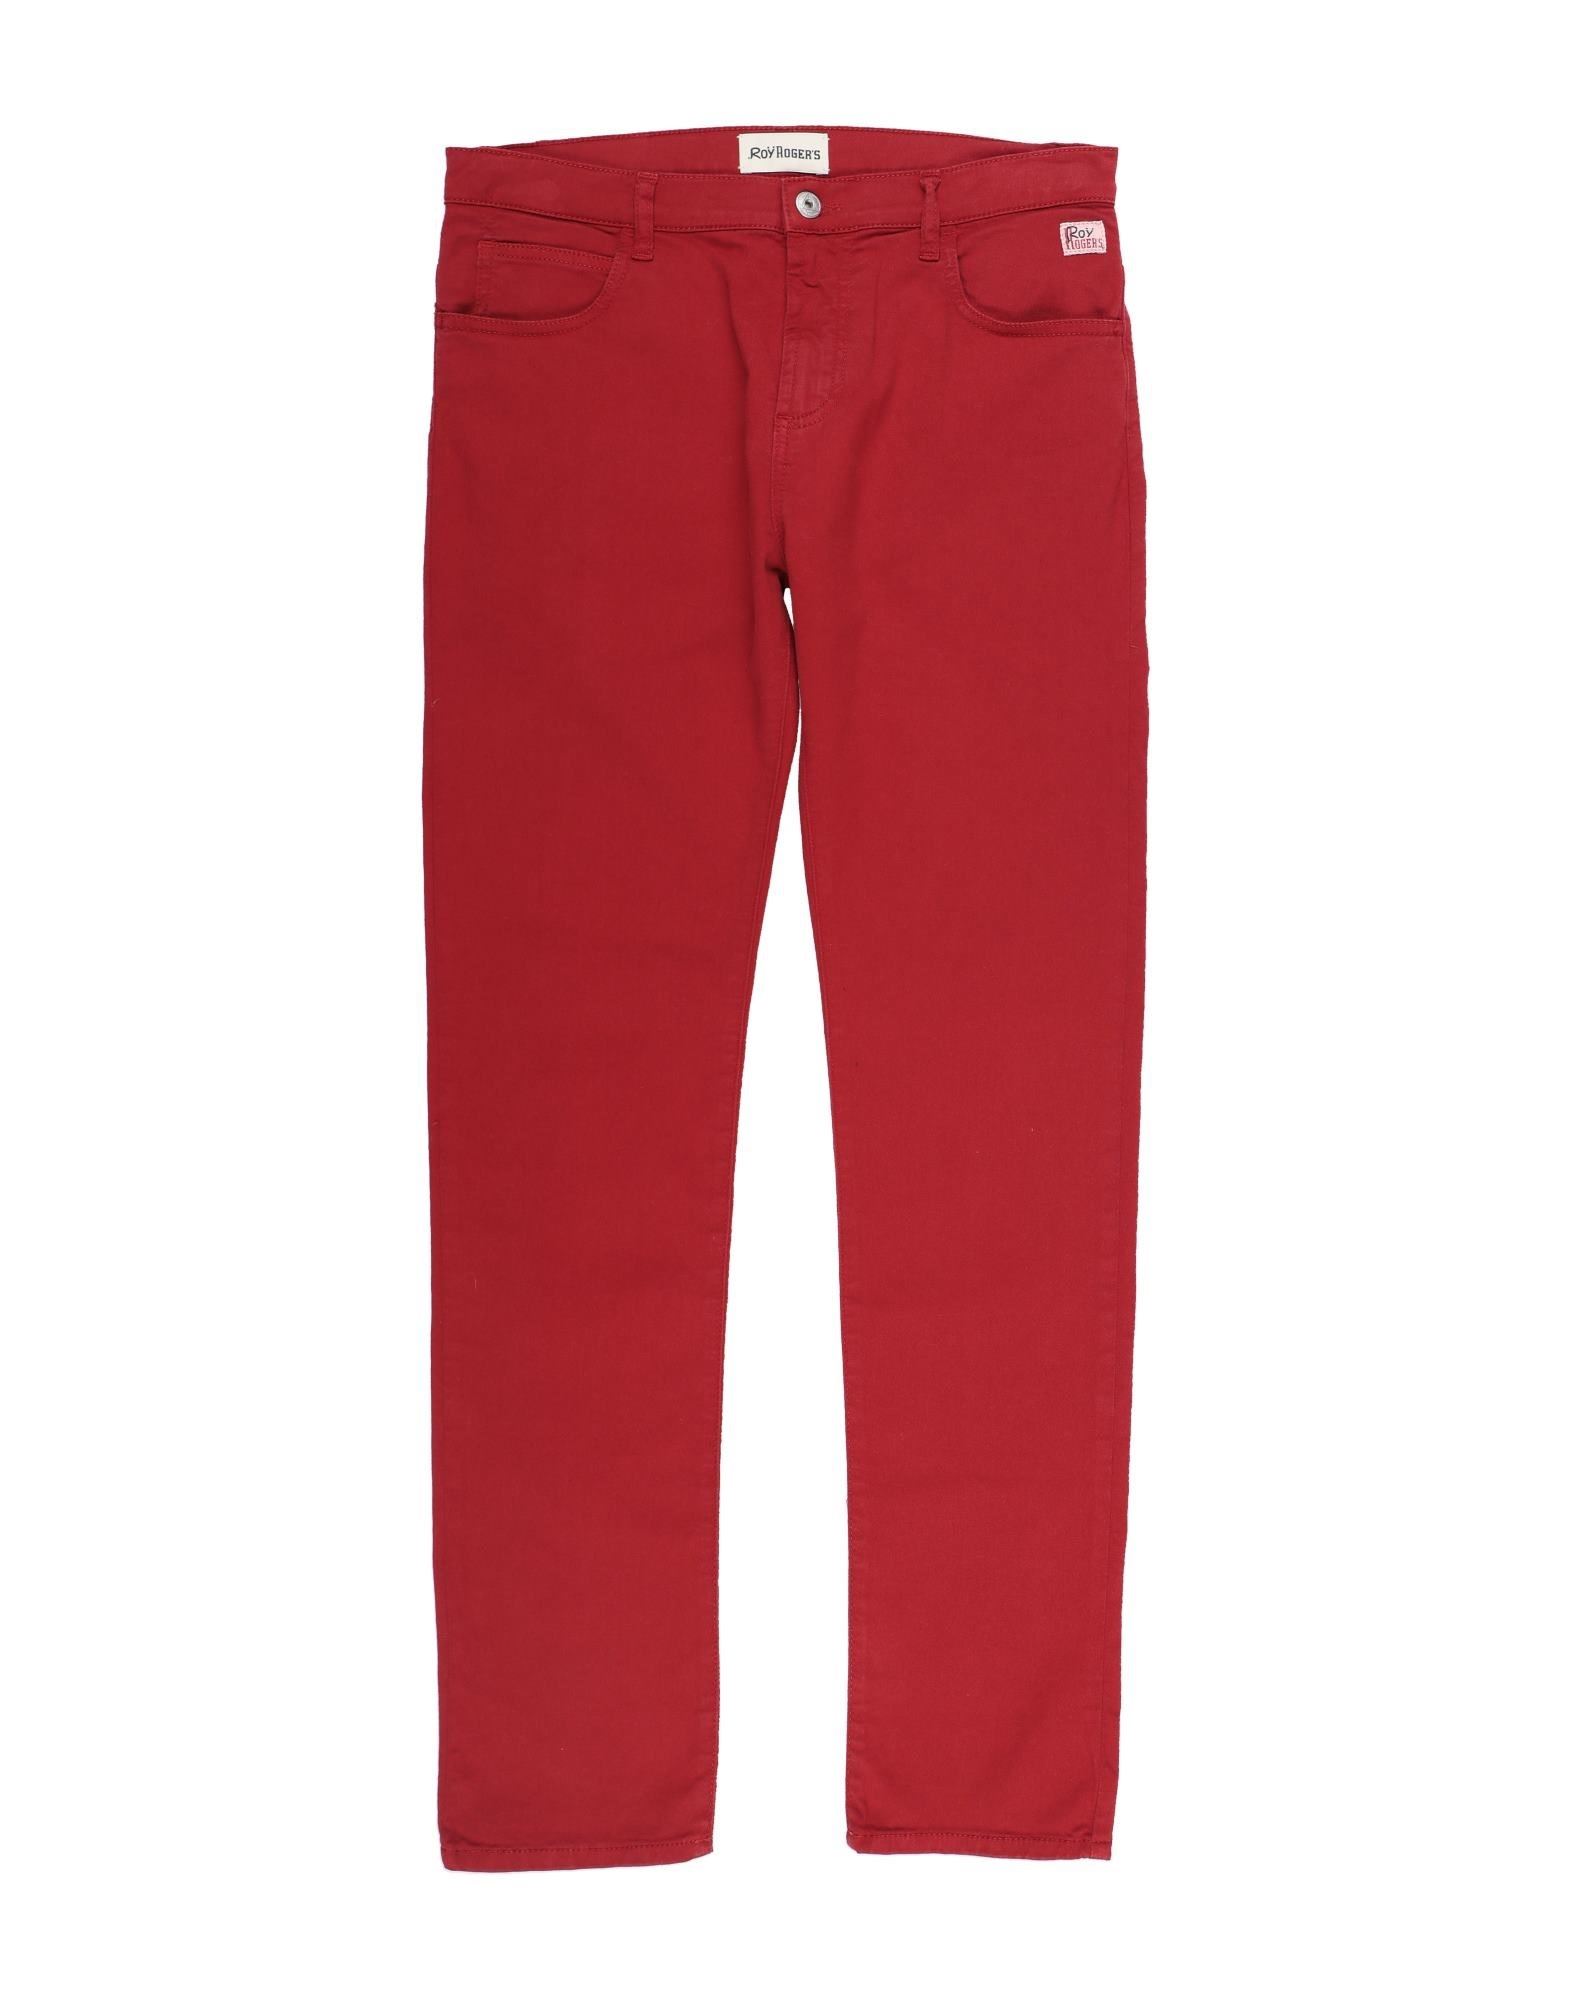 Roy Rogers Kids' Roÿ Roger's Toddler Boy Pants Red Size 6 Cotton, Elastane